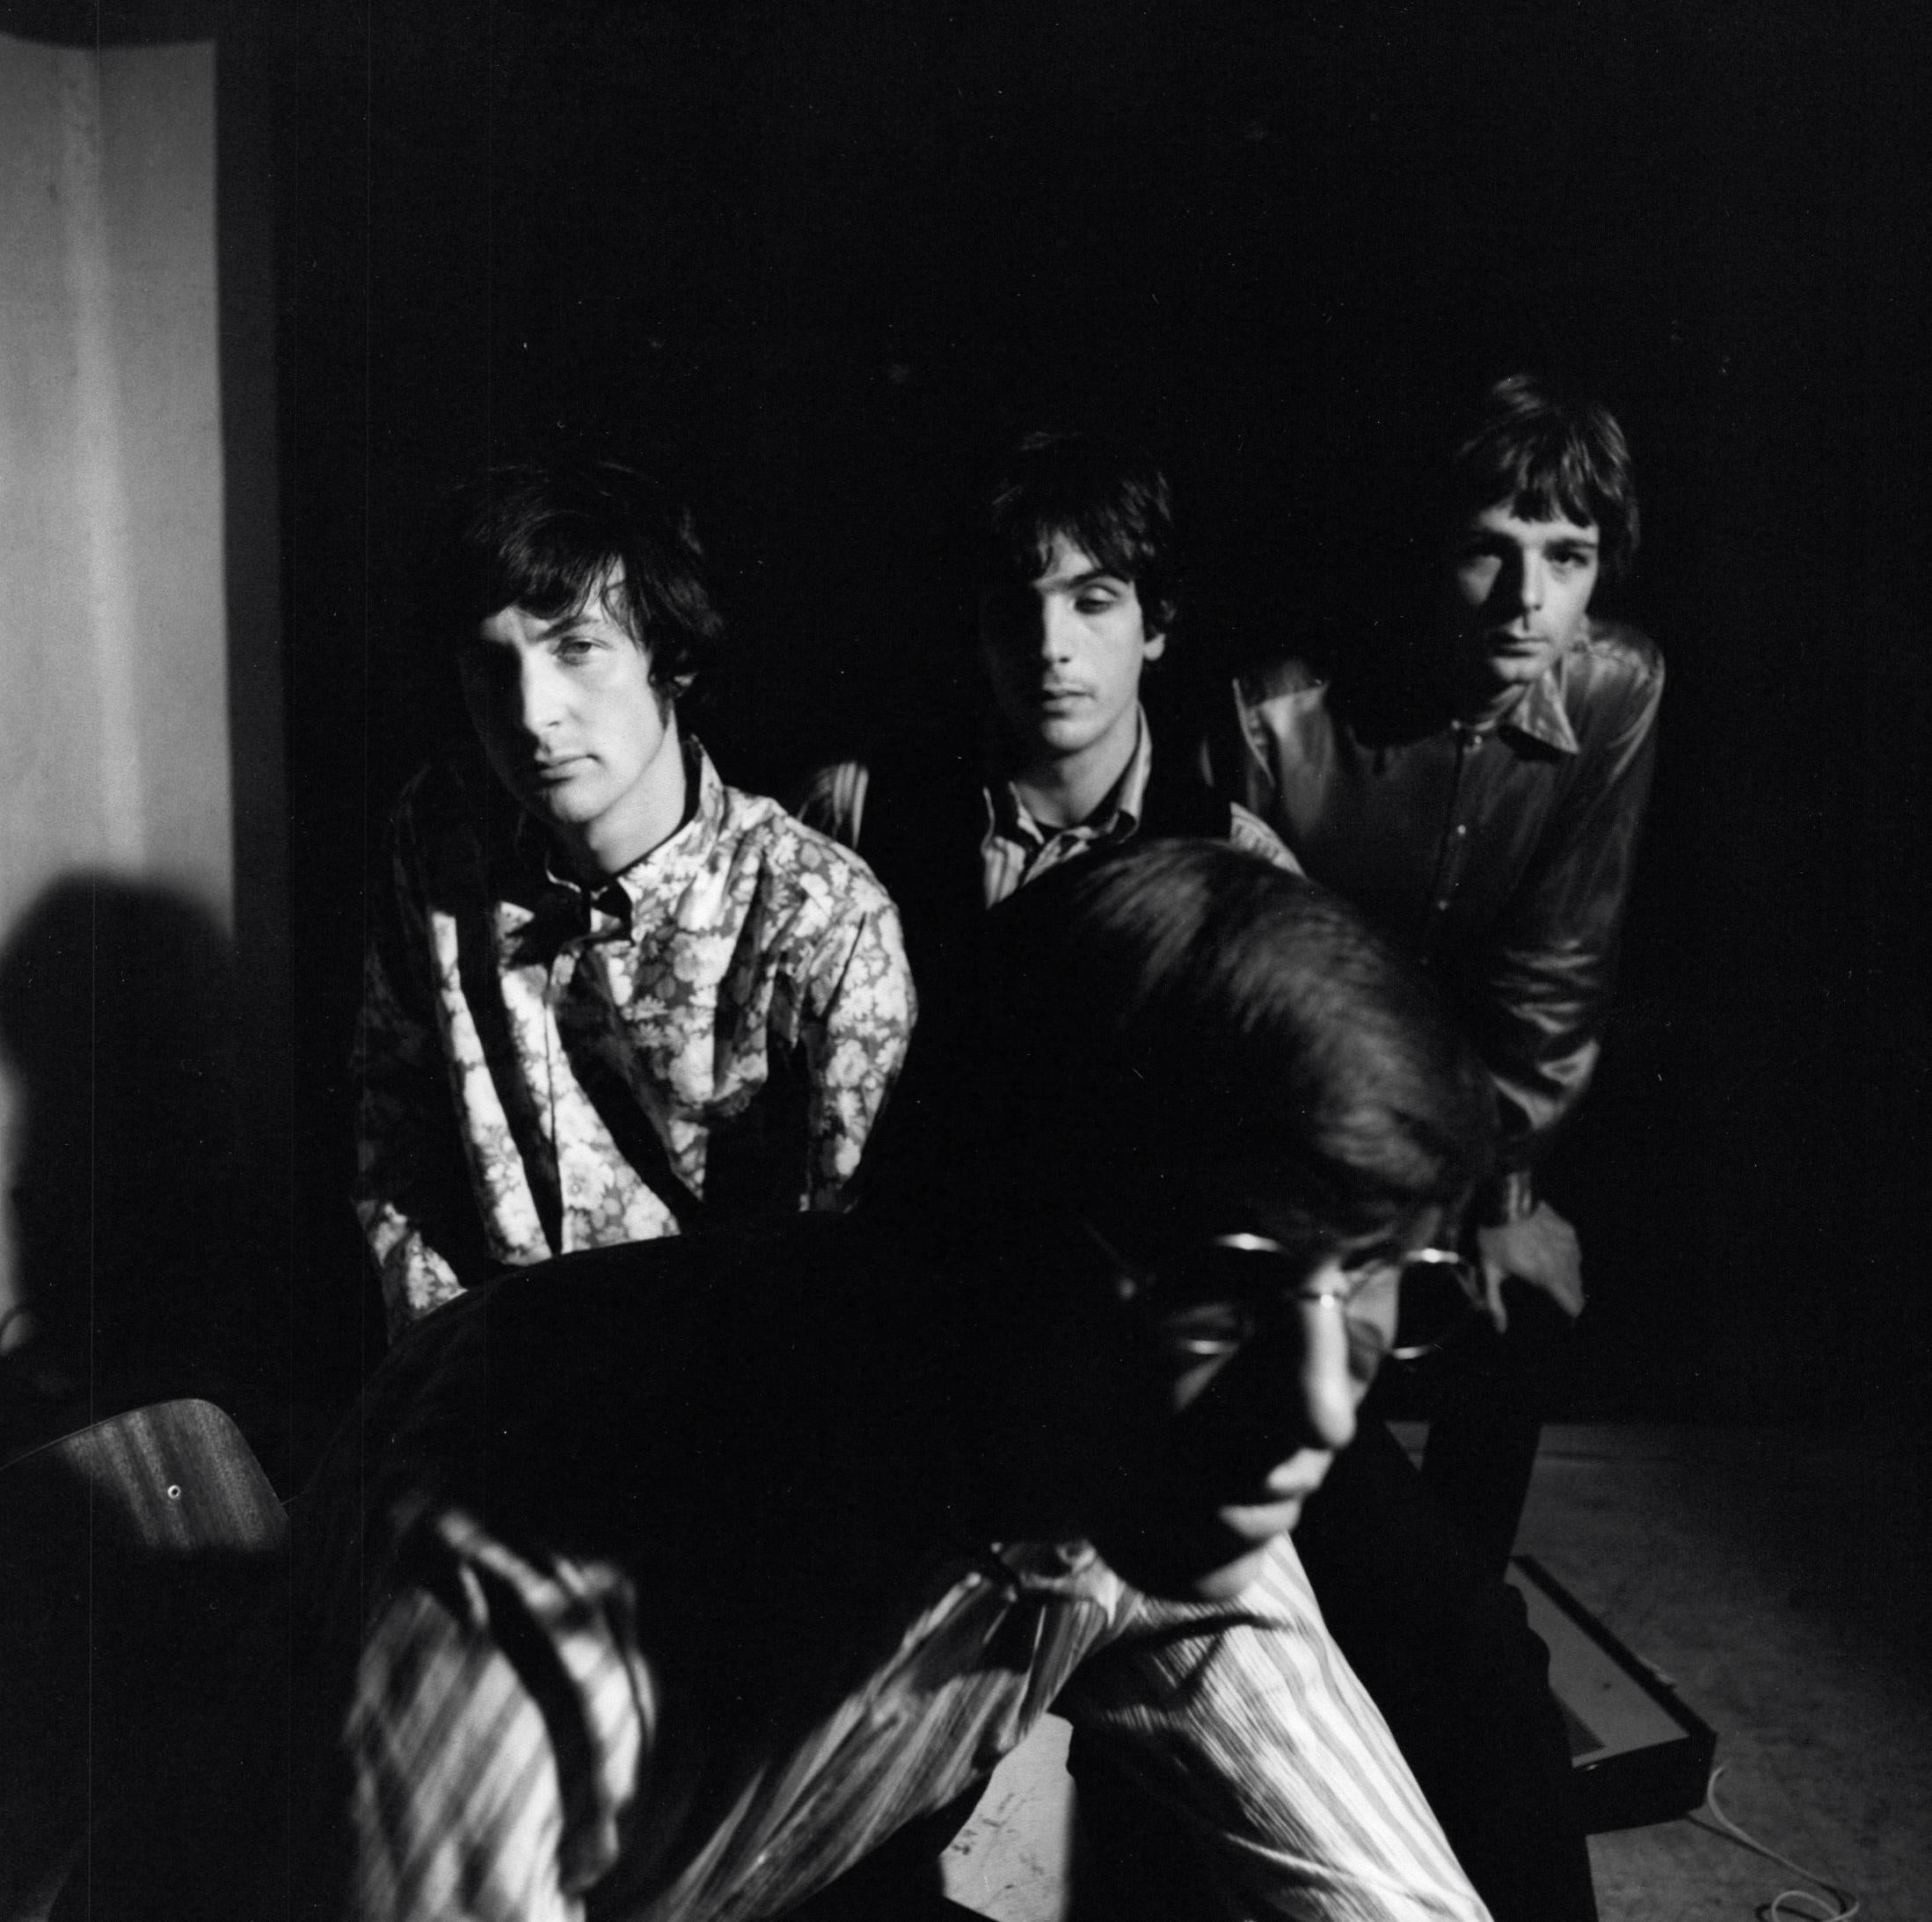 Unknown Portrait Photograph - Young Pink Floyd Candid Group Portrait in Shadow Vintage Original Photograph